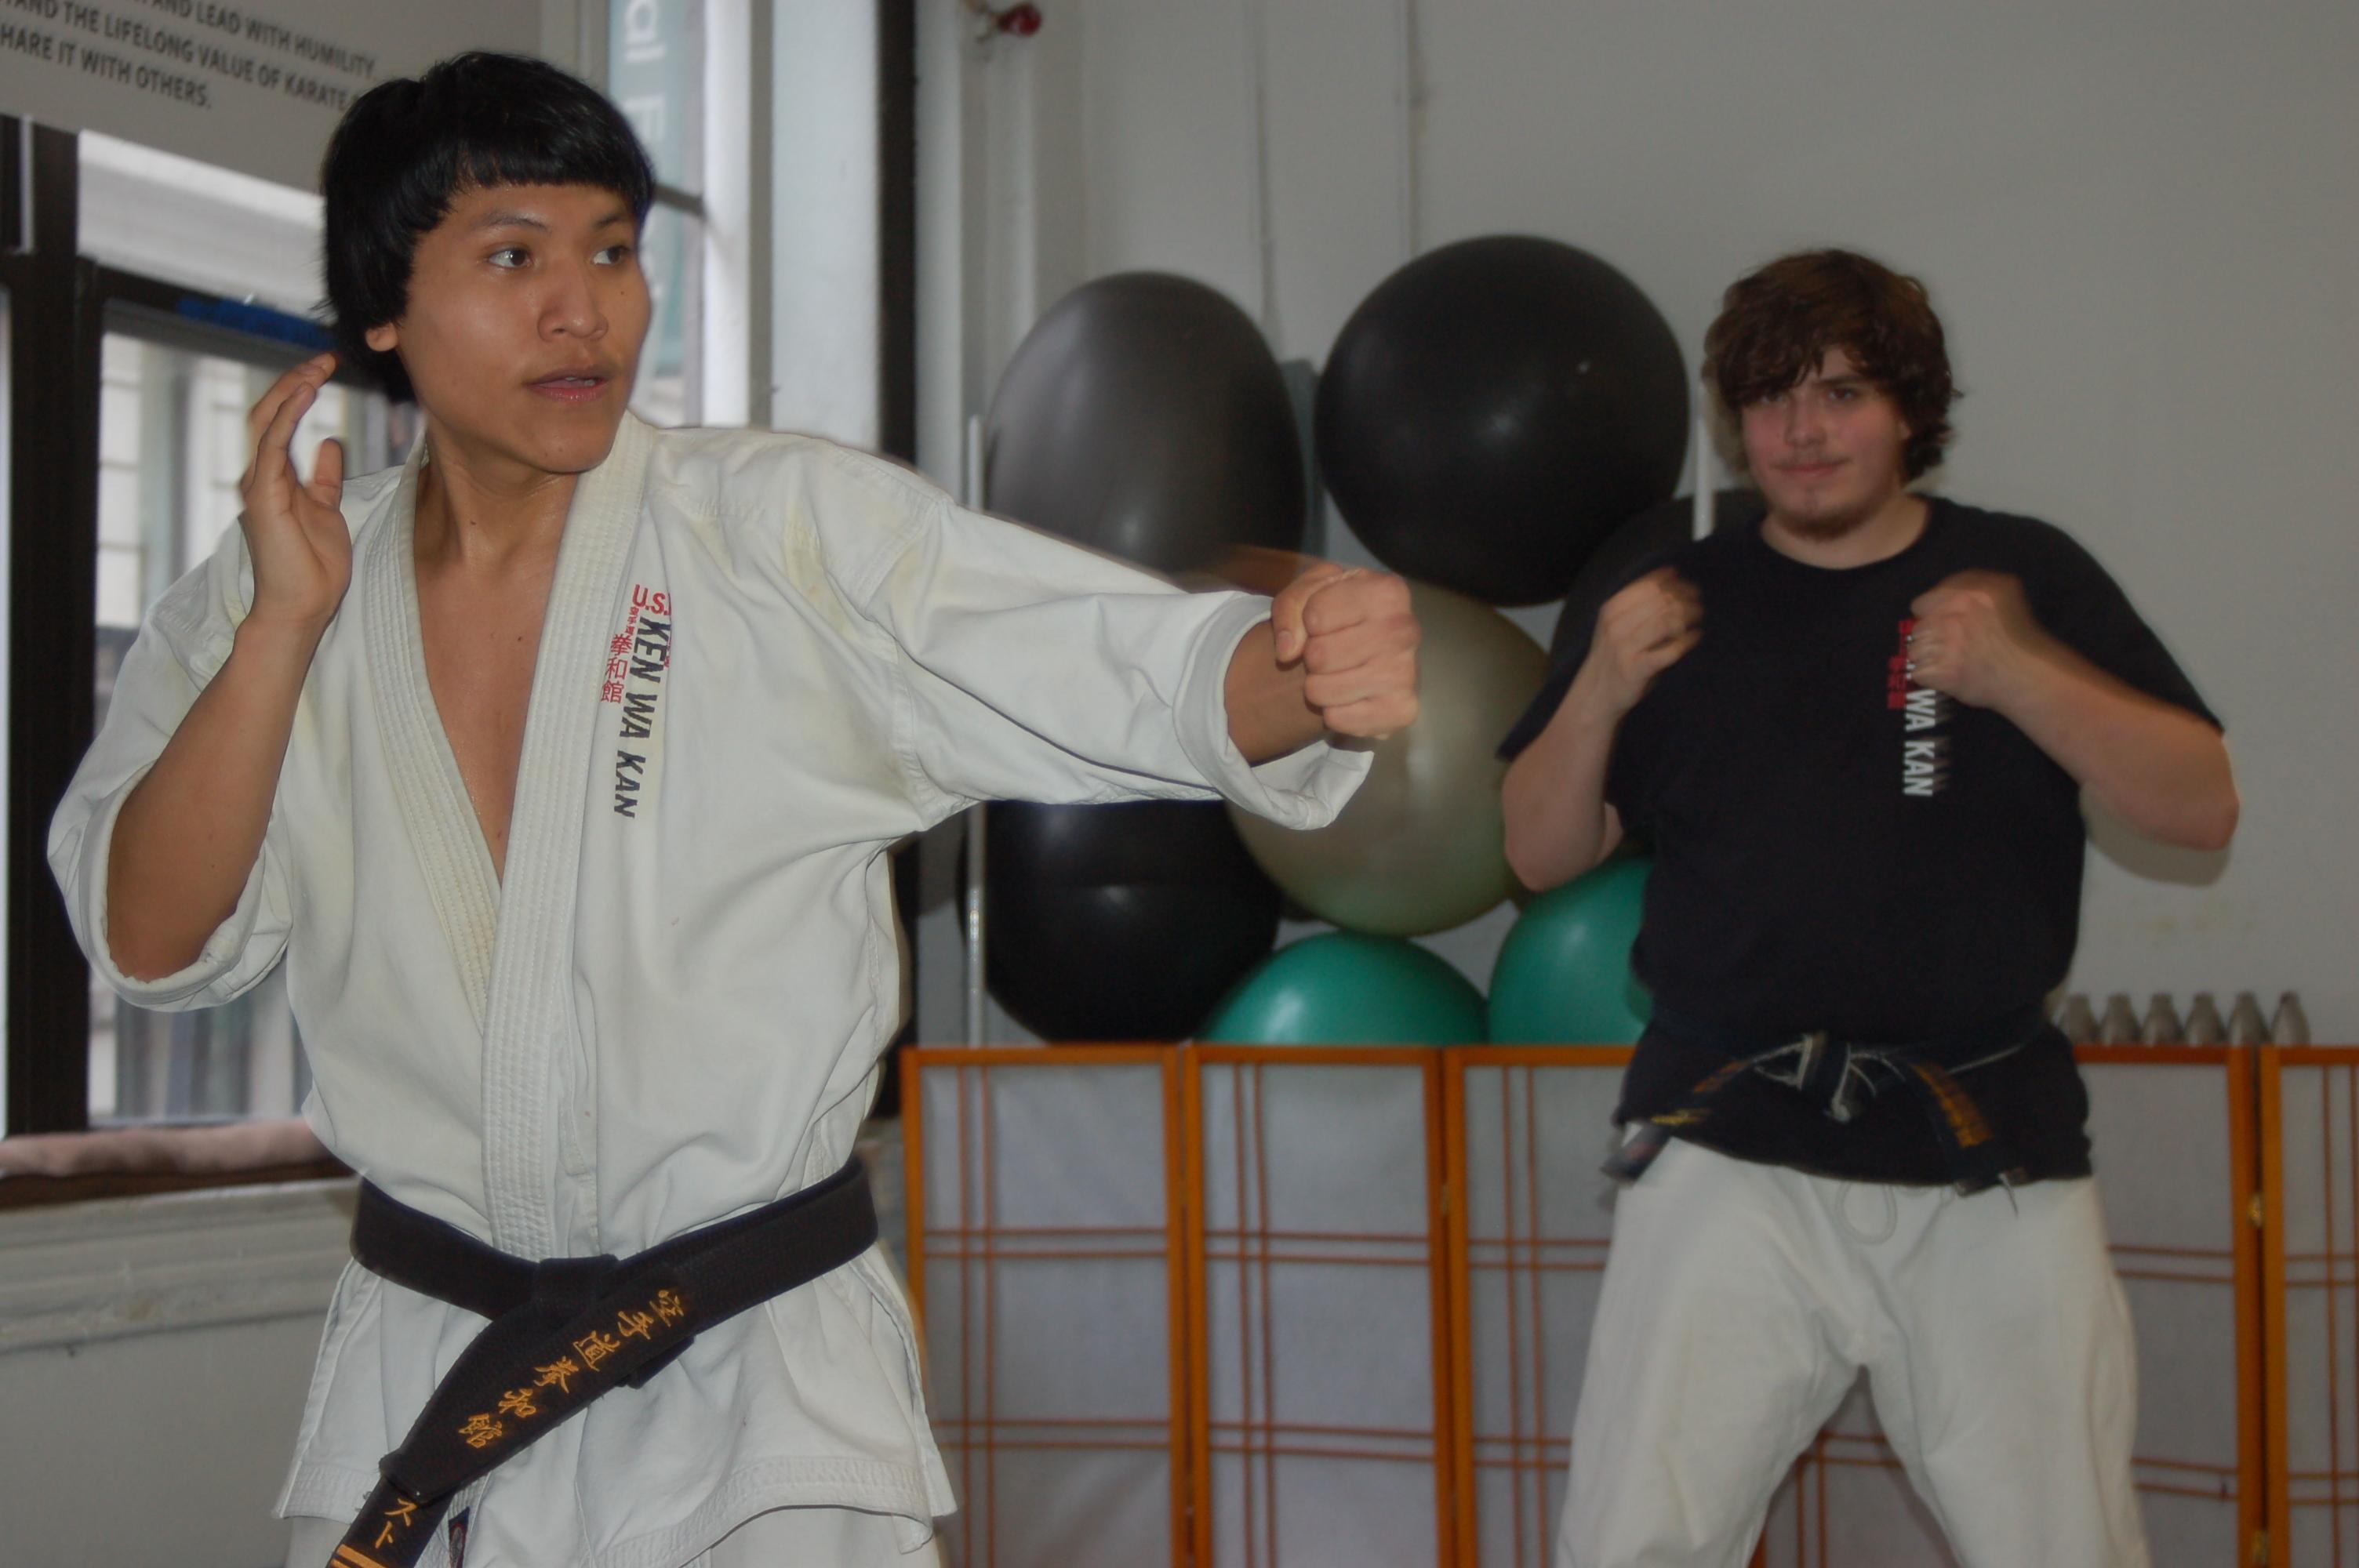 Sempai Augusto shows hook punch in his Sunday afternoon class